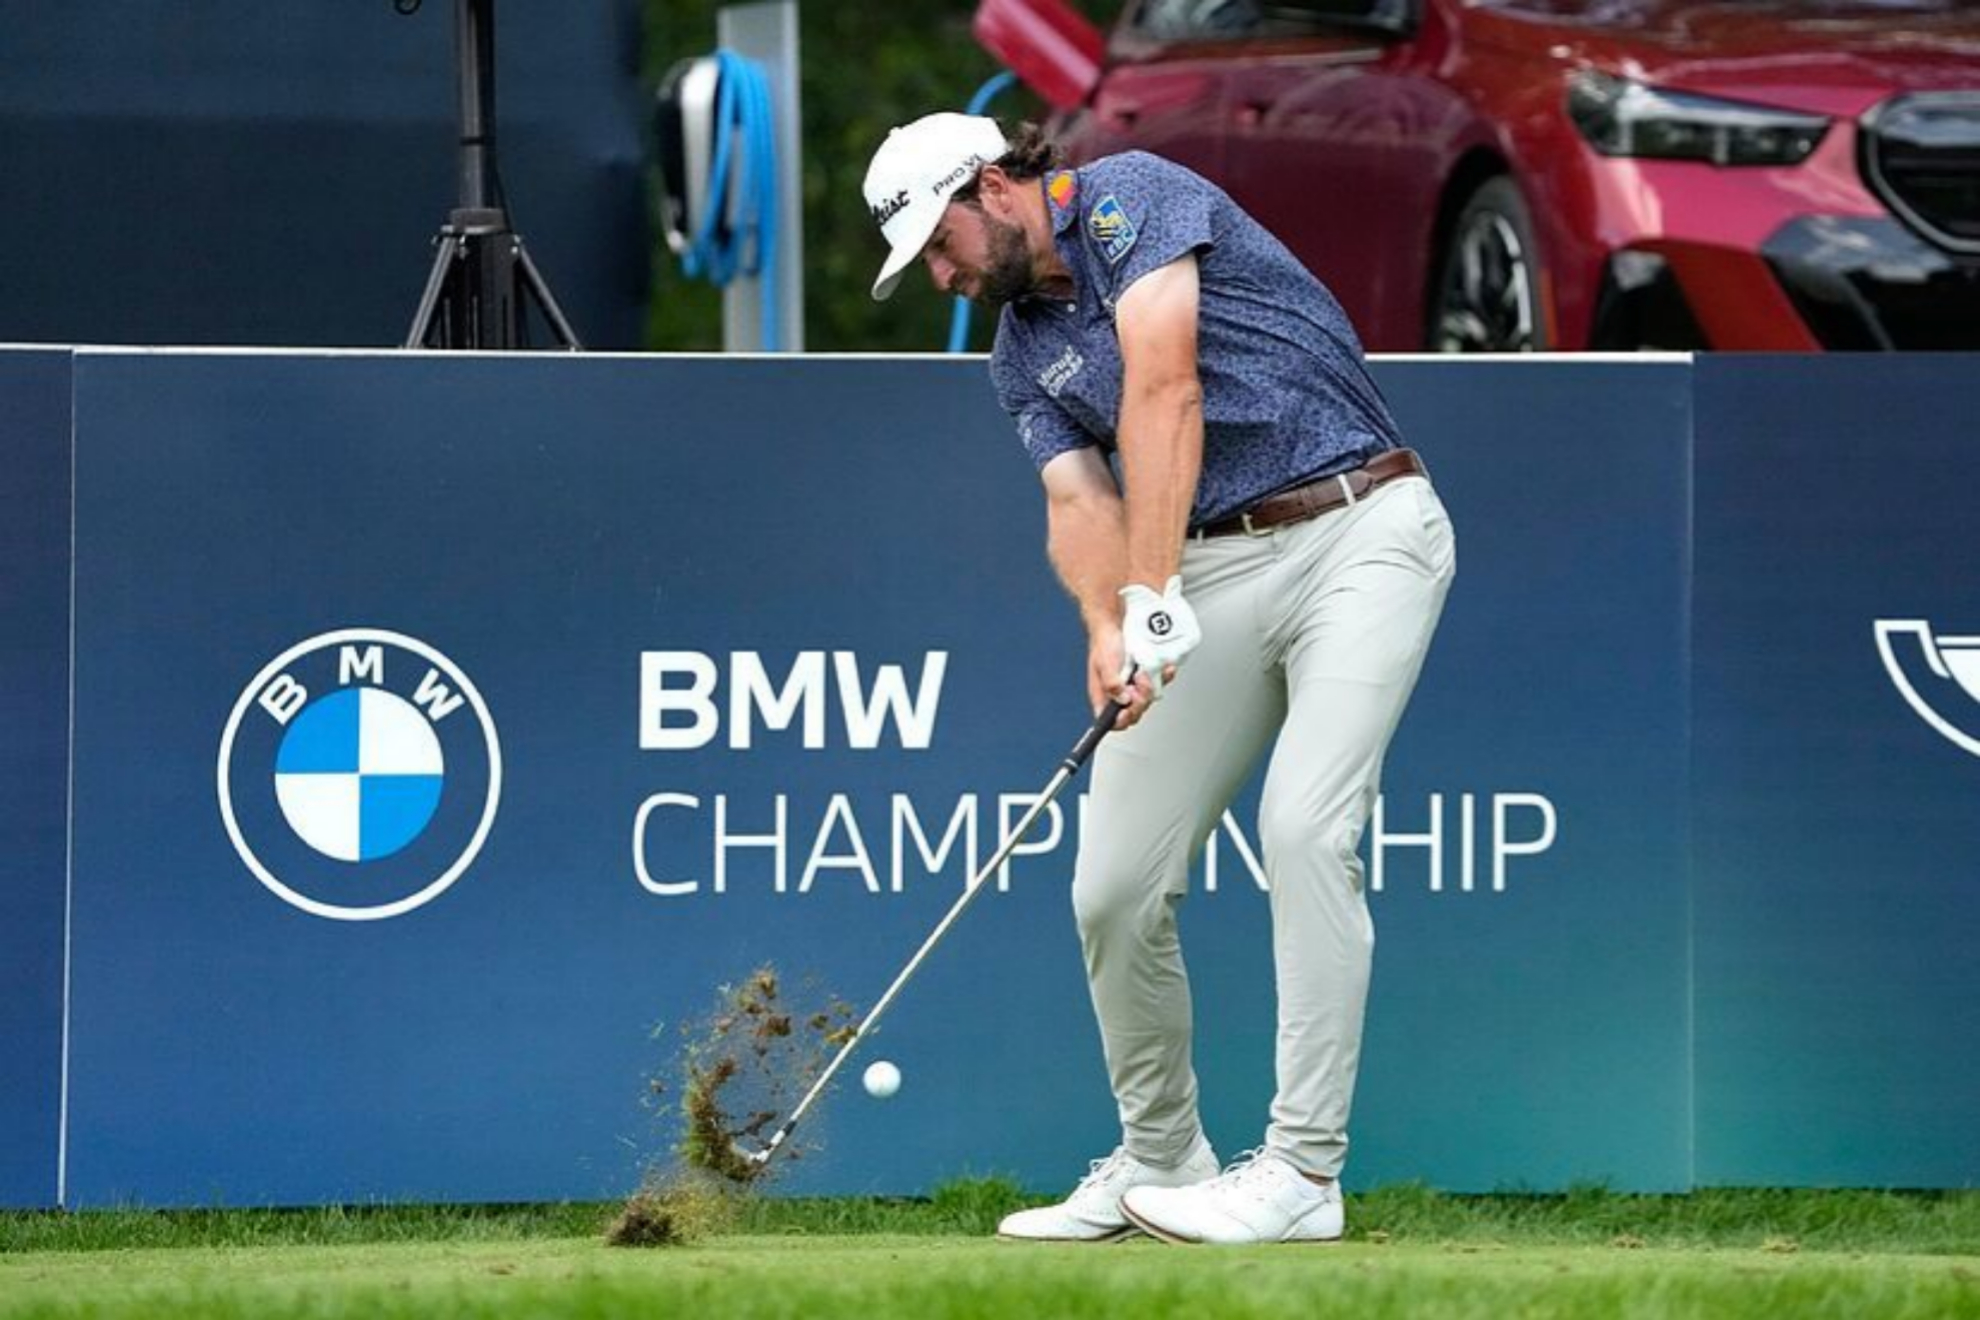 How To Watch Bmw Championship